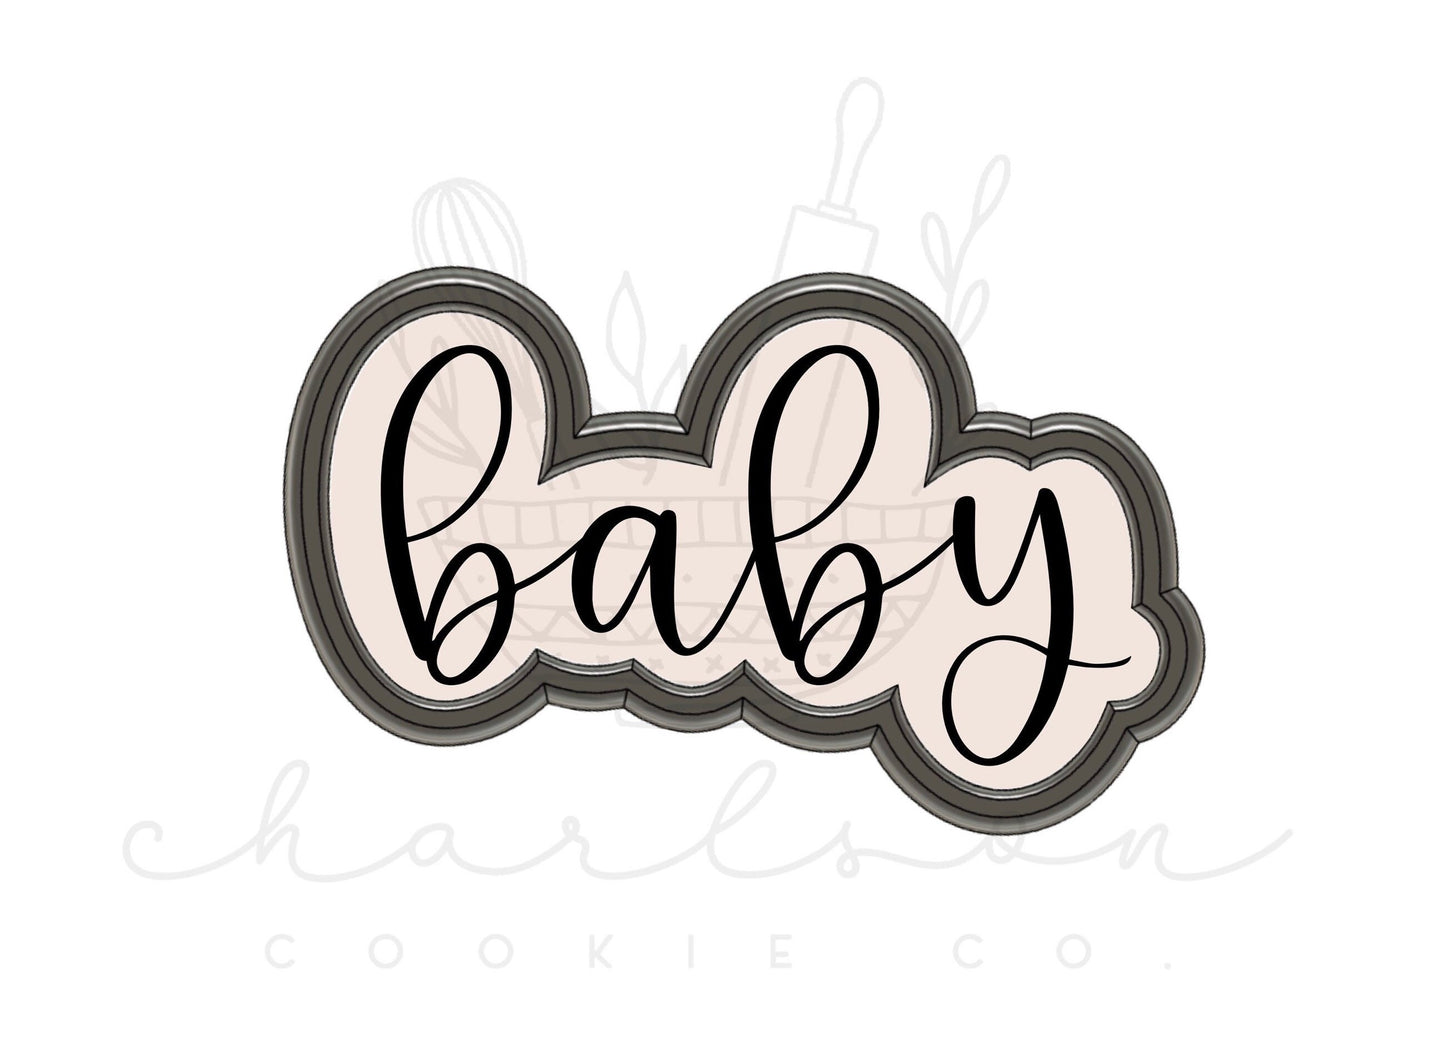 Baby word no. 2 cookie cutter